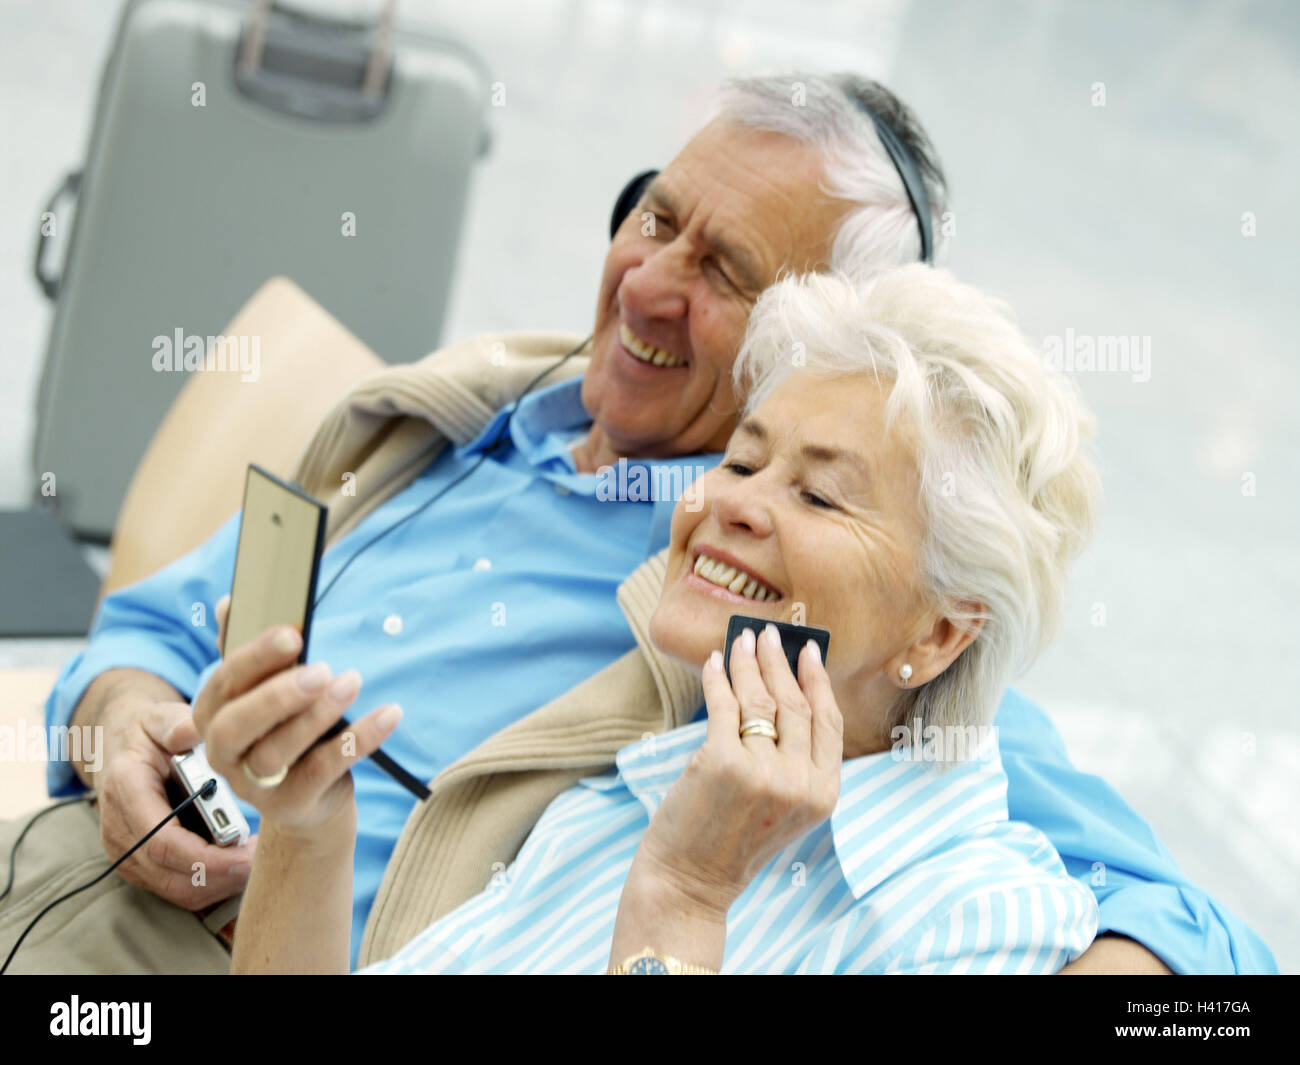 Airport, attendant zone, senior pair,  sits, waits, embrace, happy   Airport hall, chairs, bank, seats, pair, seniors, passengers, passengers, tourists, wait, man, headphones, music, music audition, woman, hand mirrors, hears make up, face powders are too Stock Photo